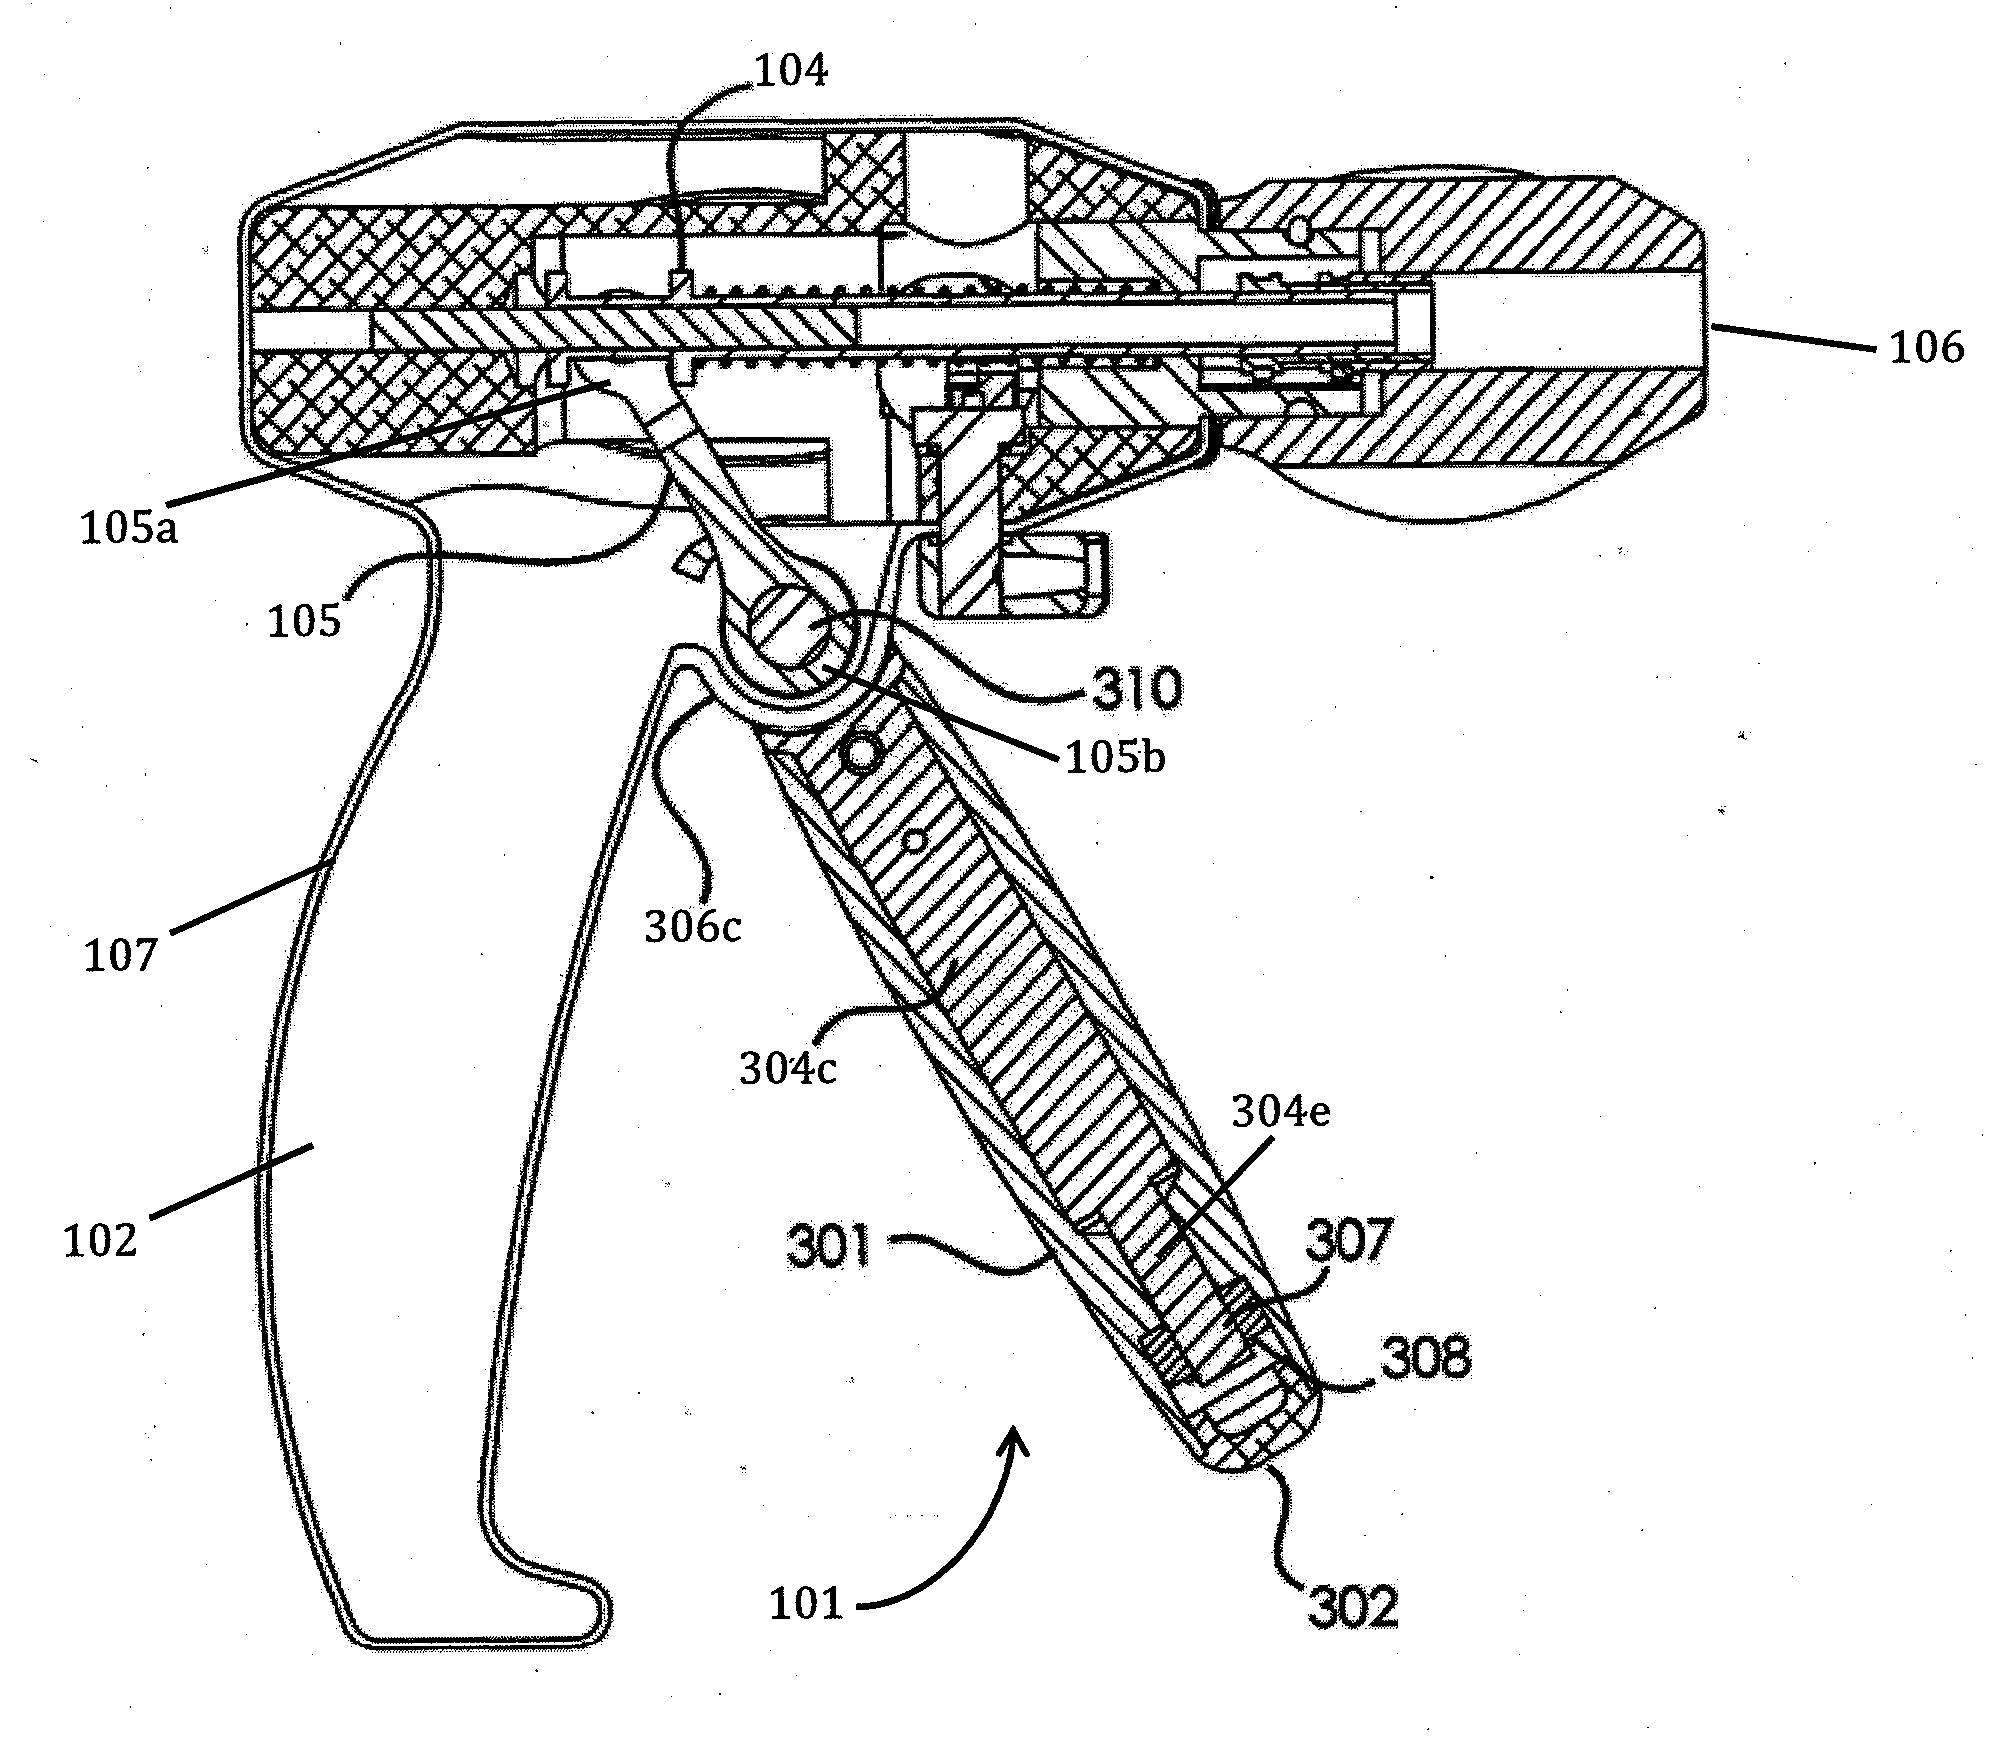 Hermetic rotating handle assembly for a surgical clip applier for laparoscopic procedures